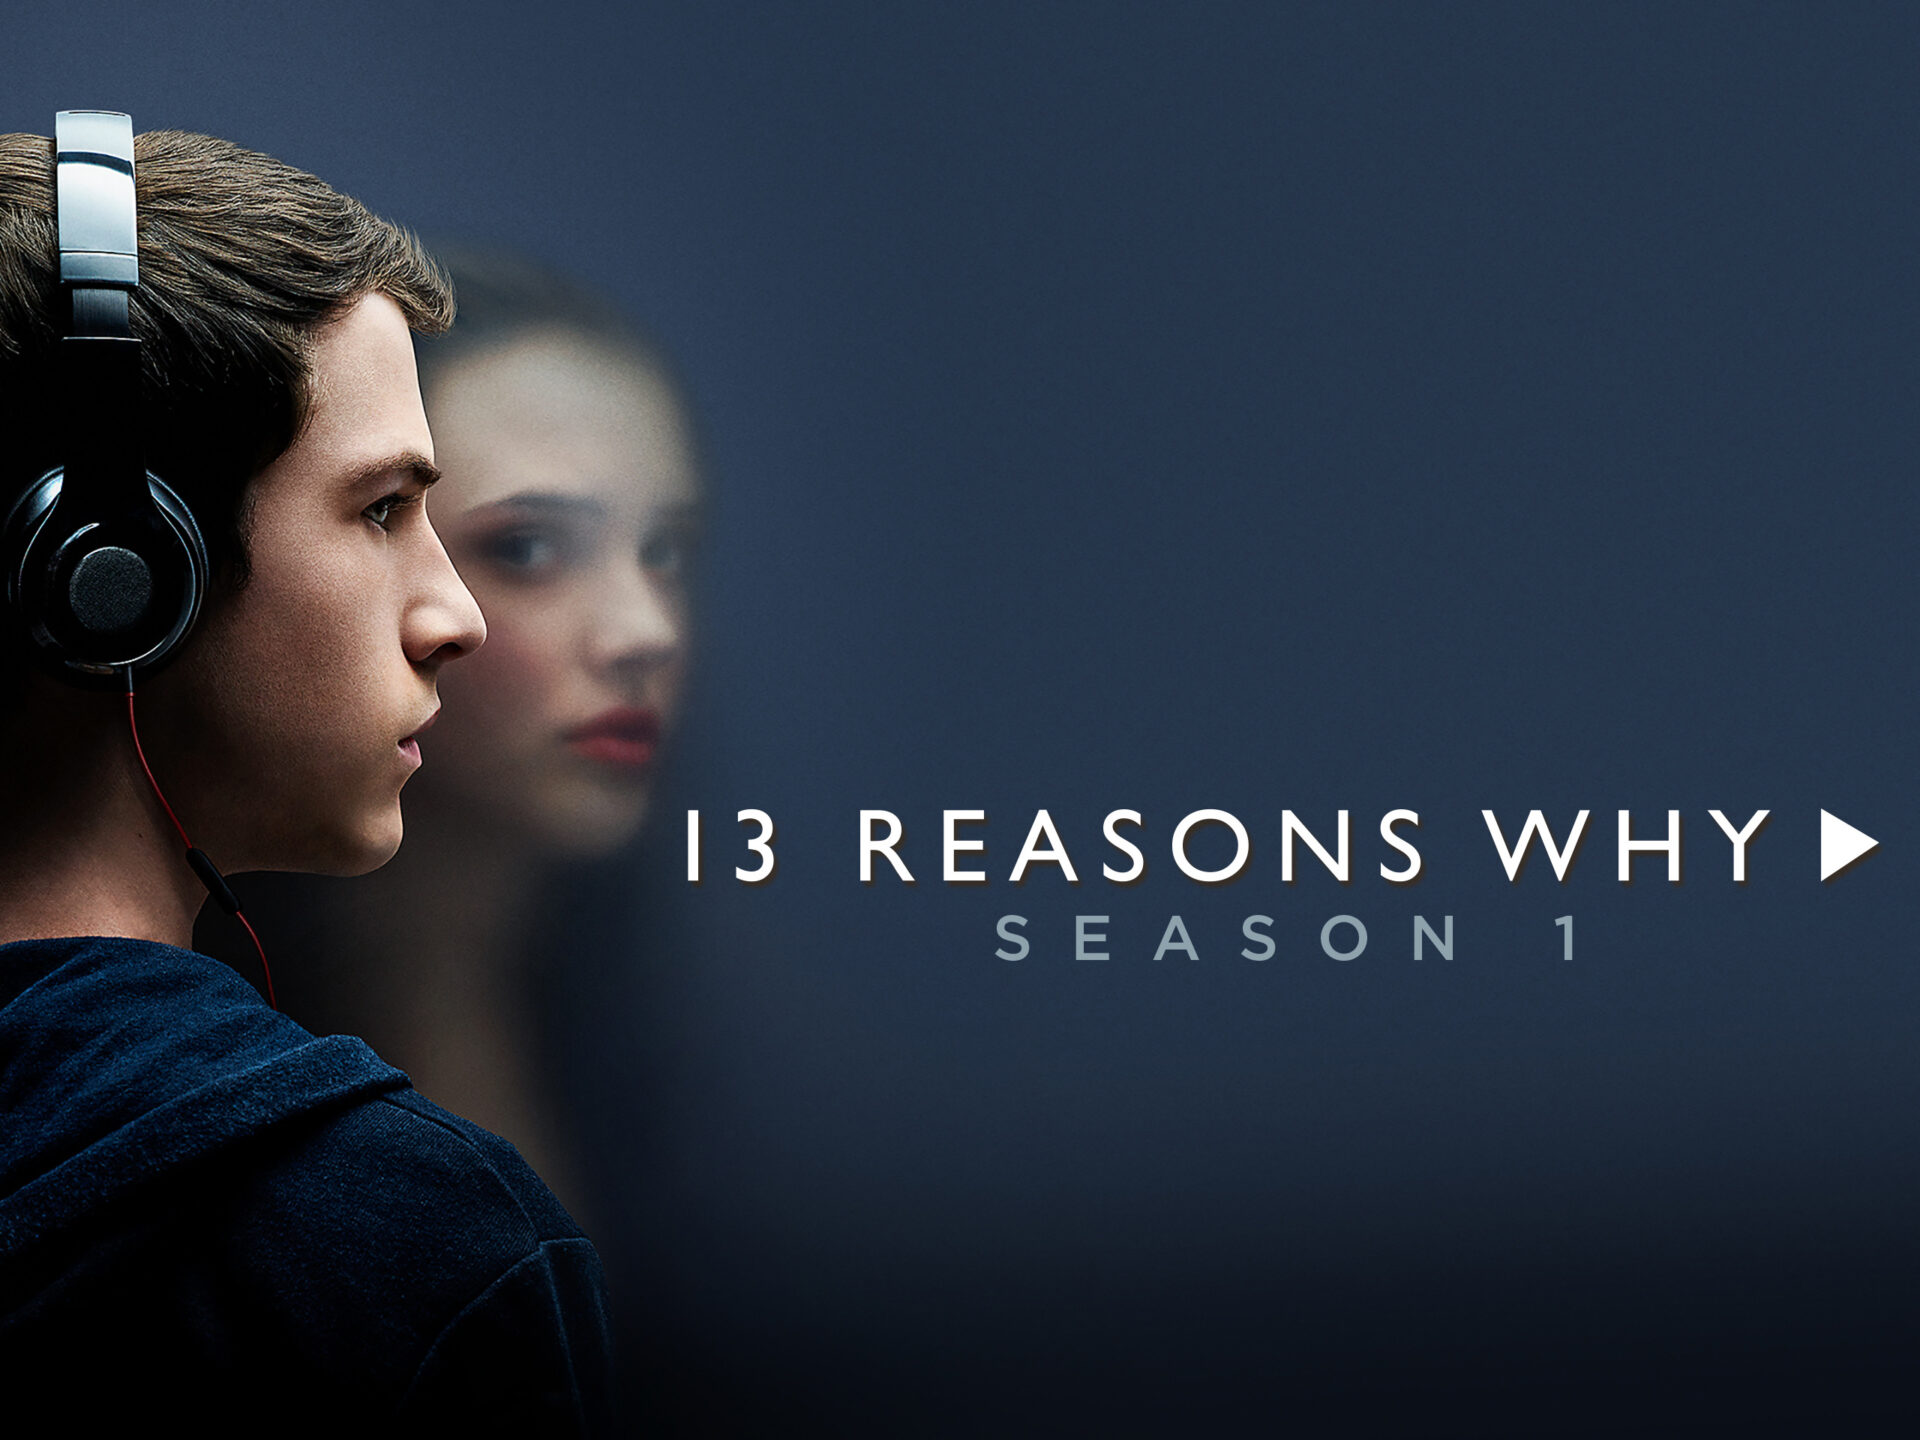 13 Life Lessons Learned From ’13 Reasons Why’